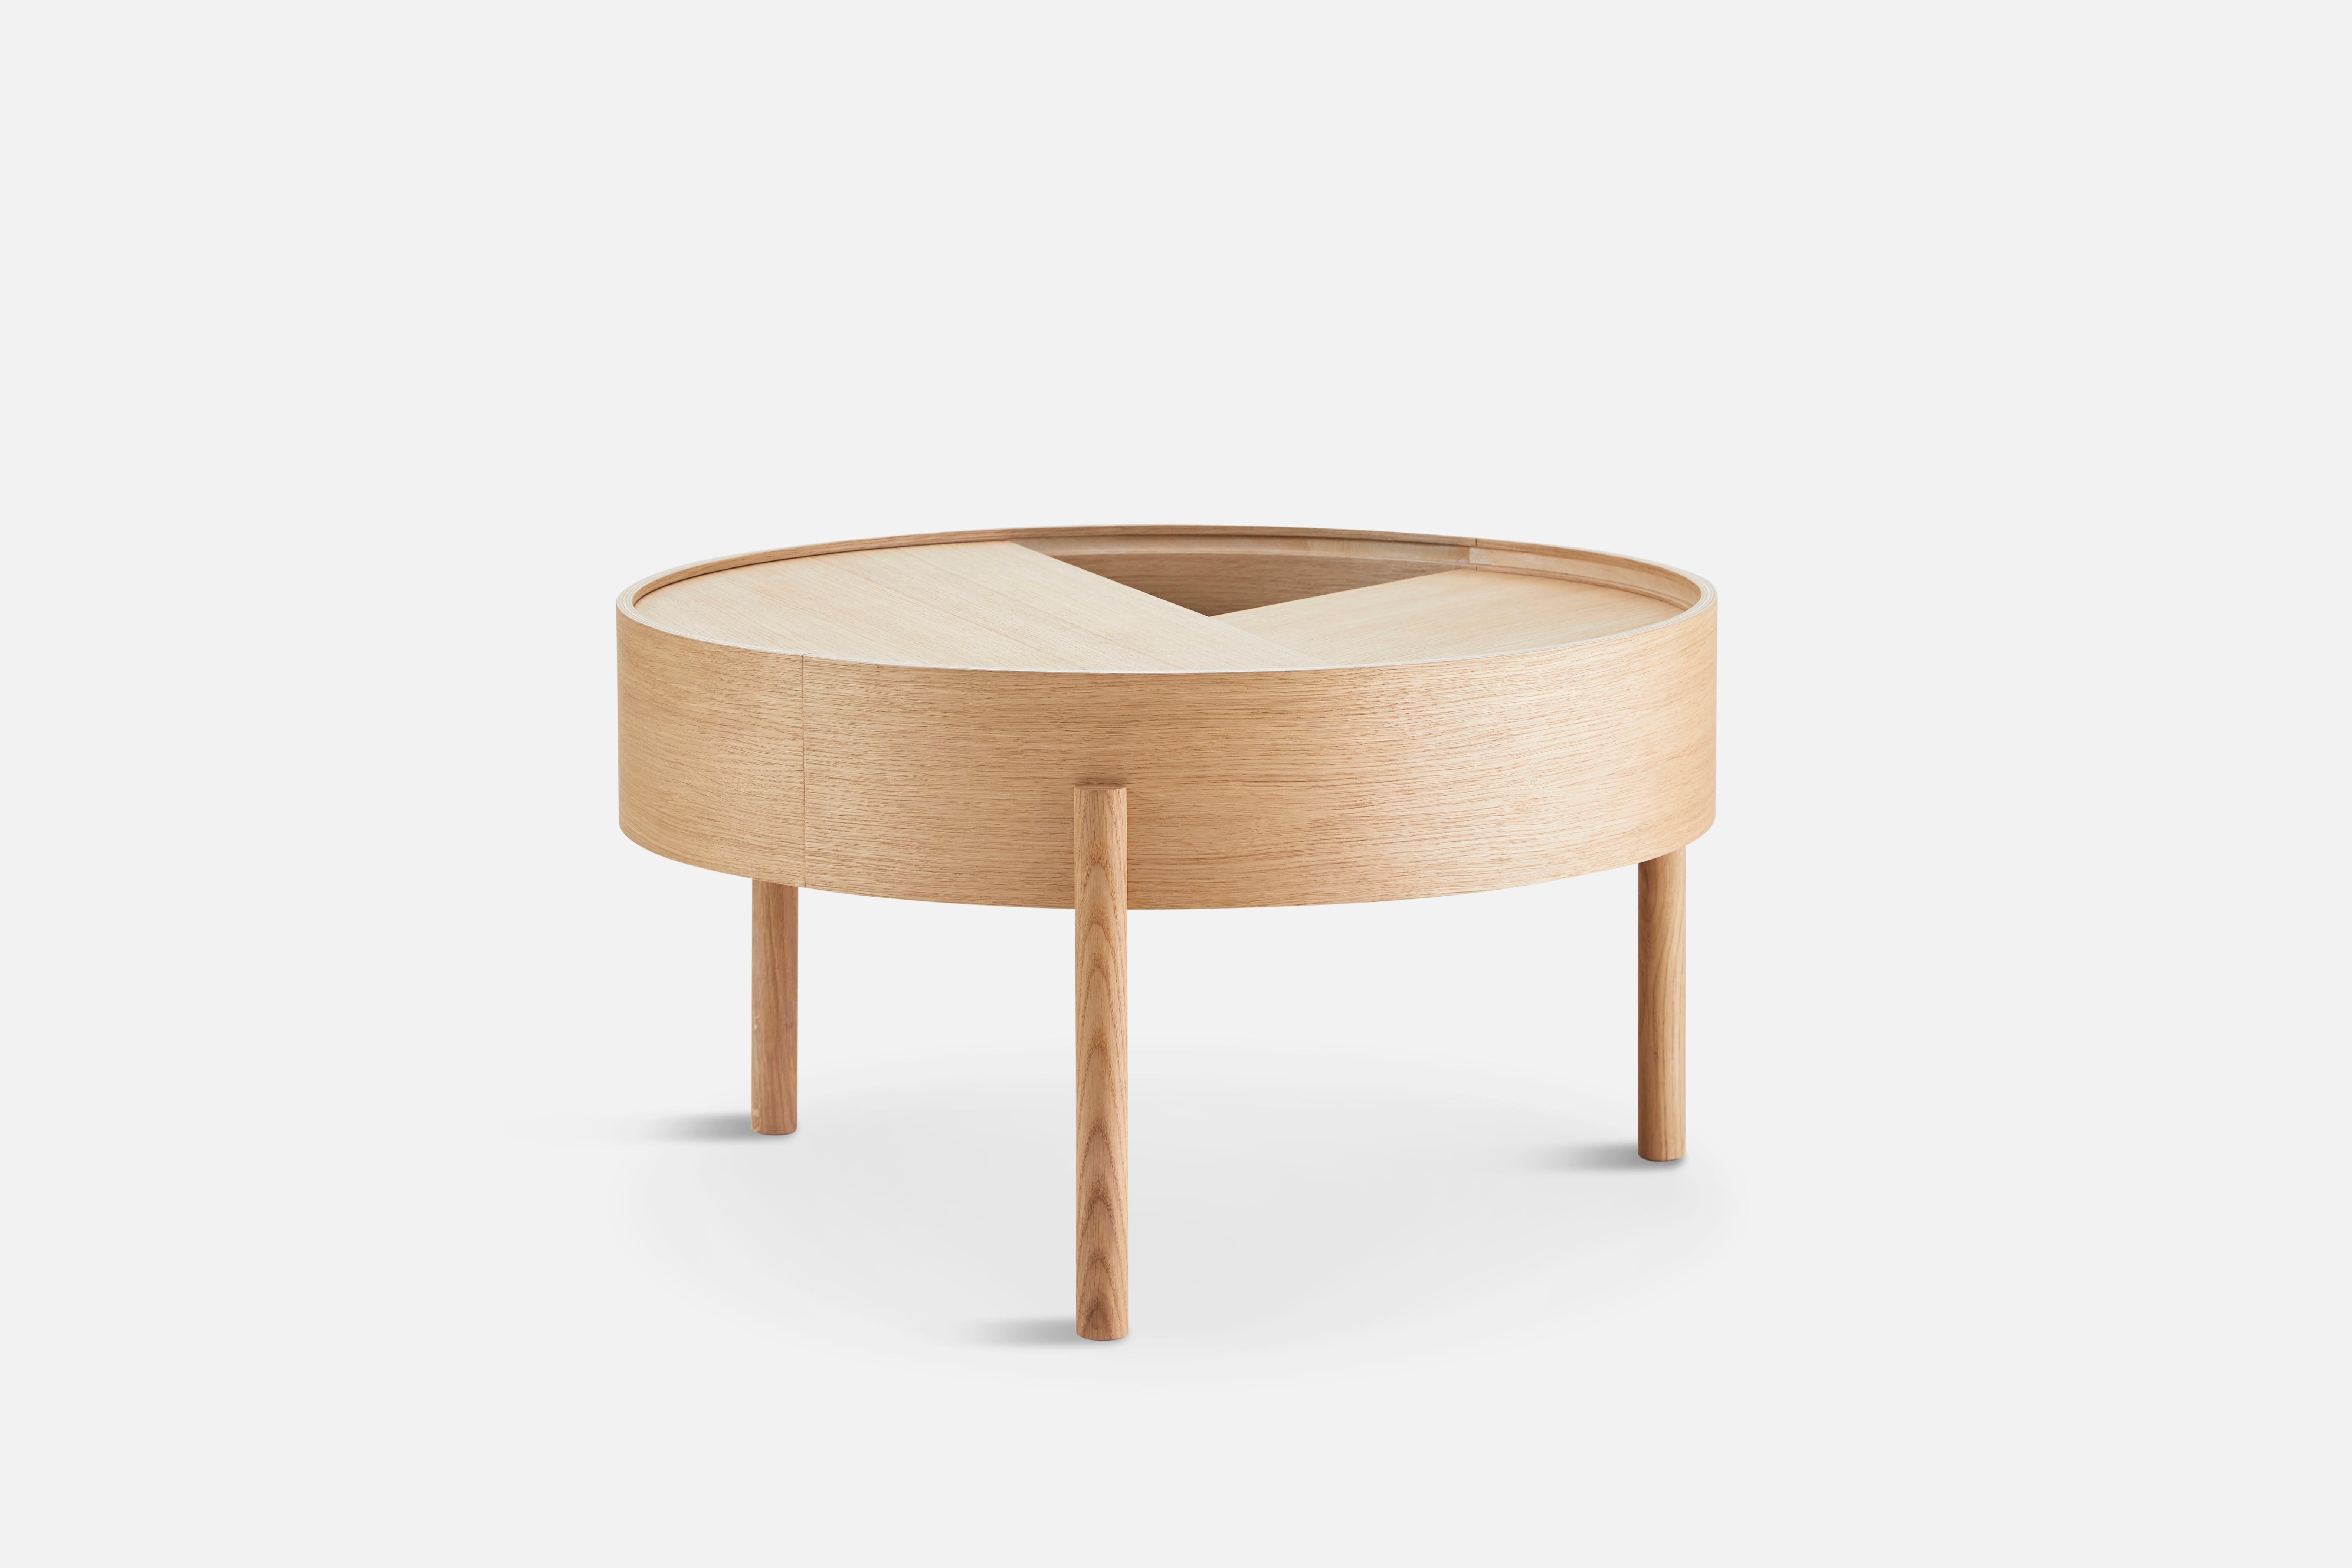 Oiled oak arc side table 66 by Ditte Vad and Julie Bertrup
Materials: oak, nano laminate
Dimensions: D 66 x W 66 x H 38 cm
Also available in different sizes and materials: ash, oak, walnut, venner with solid ash/oak, walnut legs.

The founders,